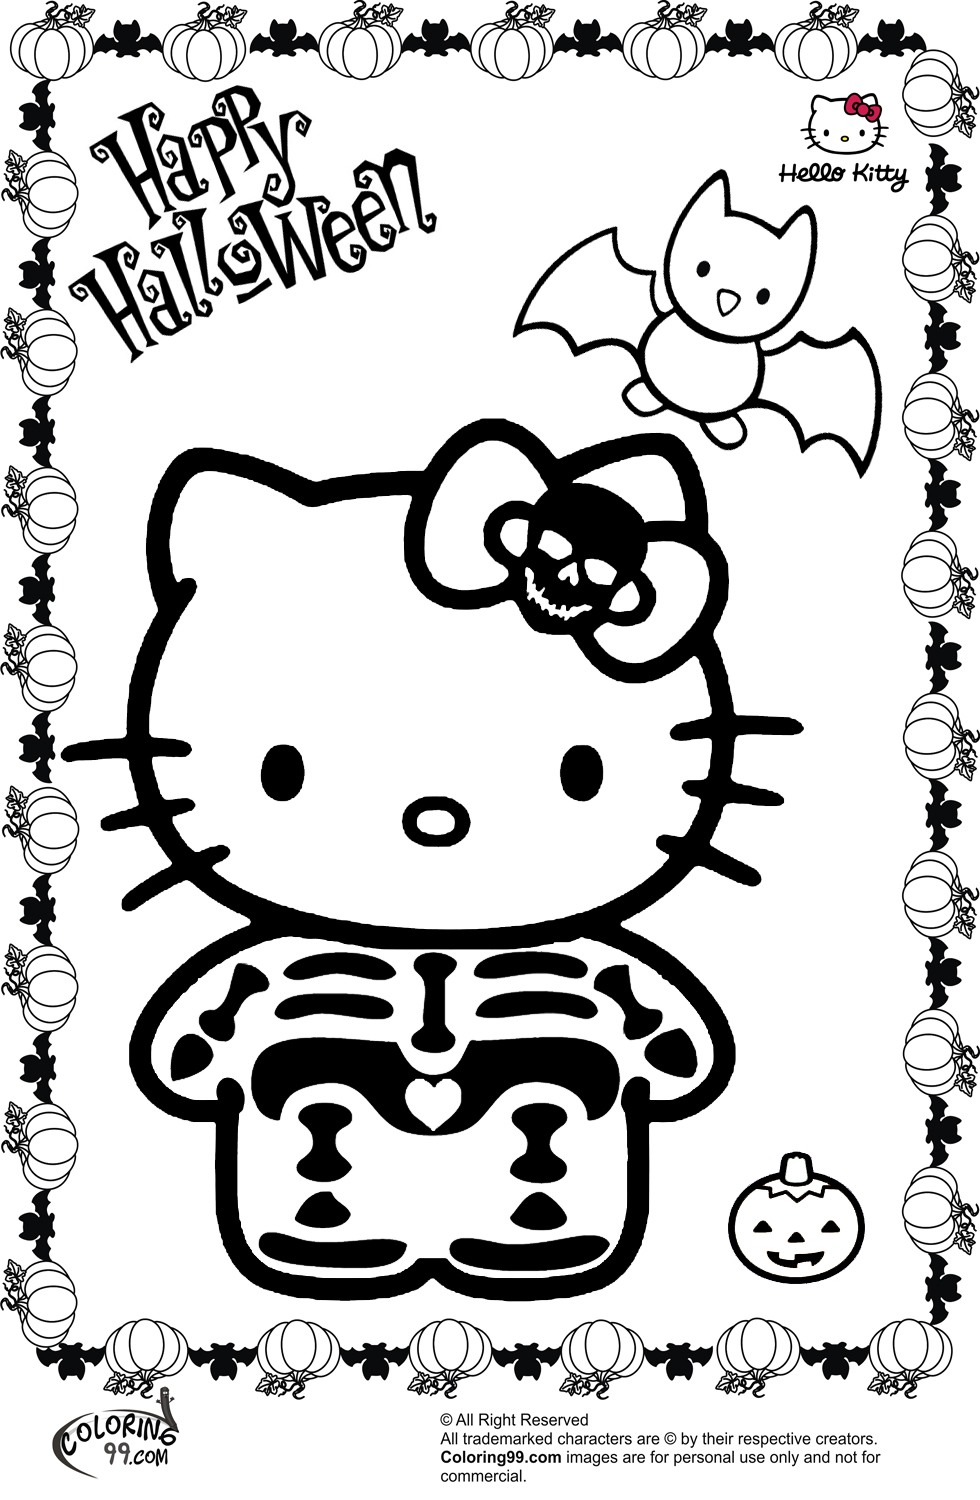 Download Hello Kitty Halloween Coloring Pages | Team colors